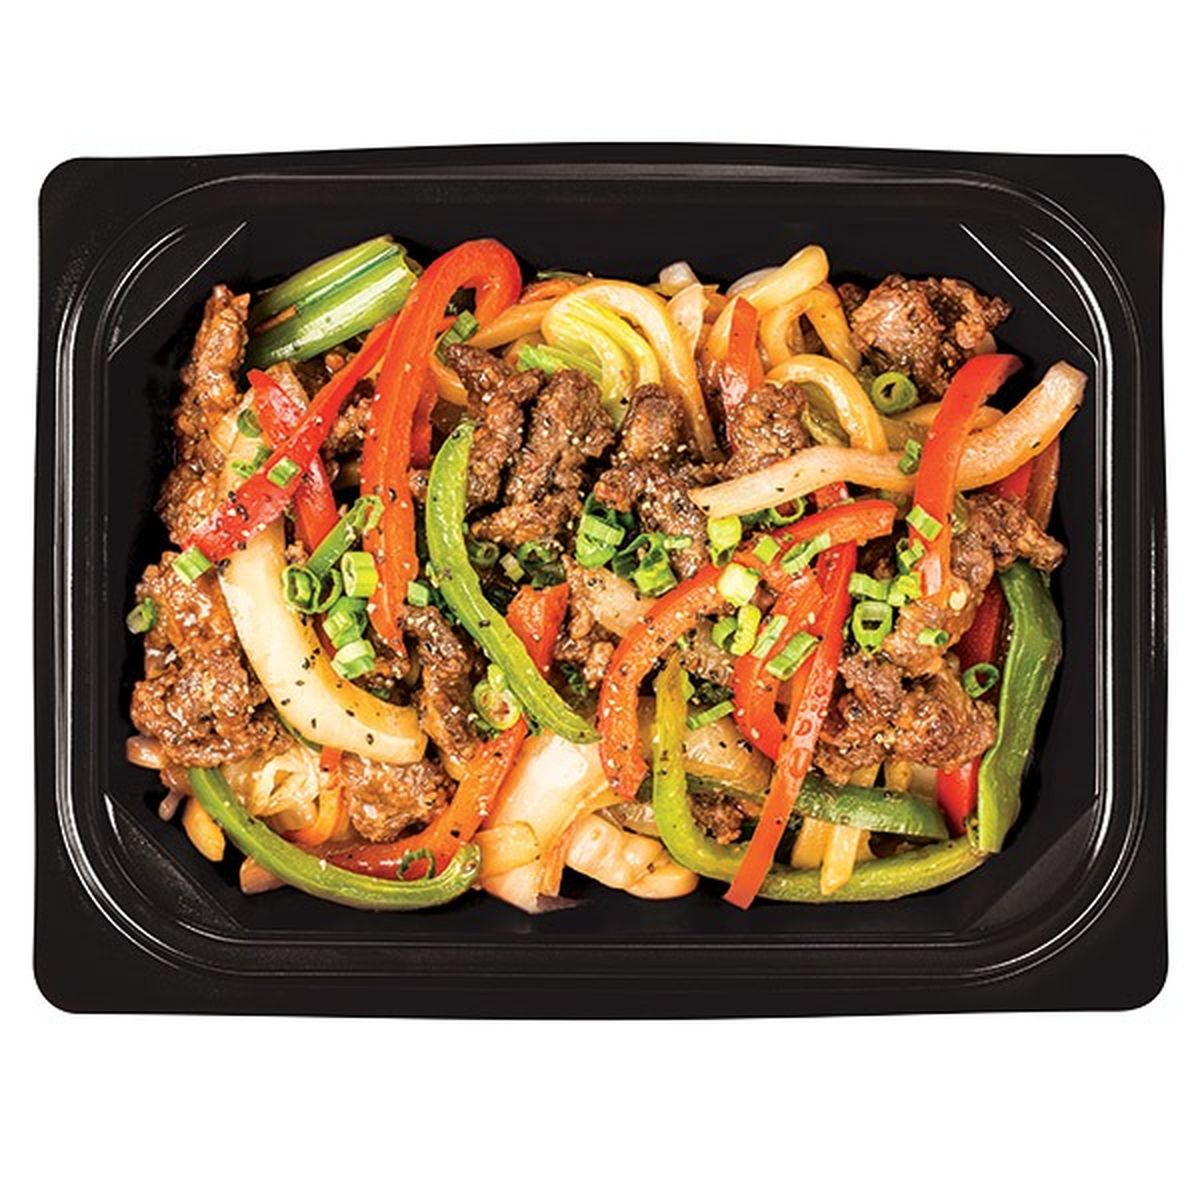 Calories in Wegmans Black Pepper Beef with Vegetable Udon Noodles